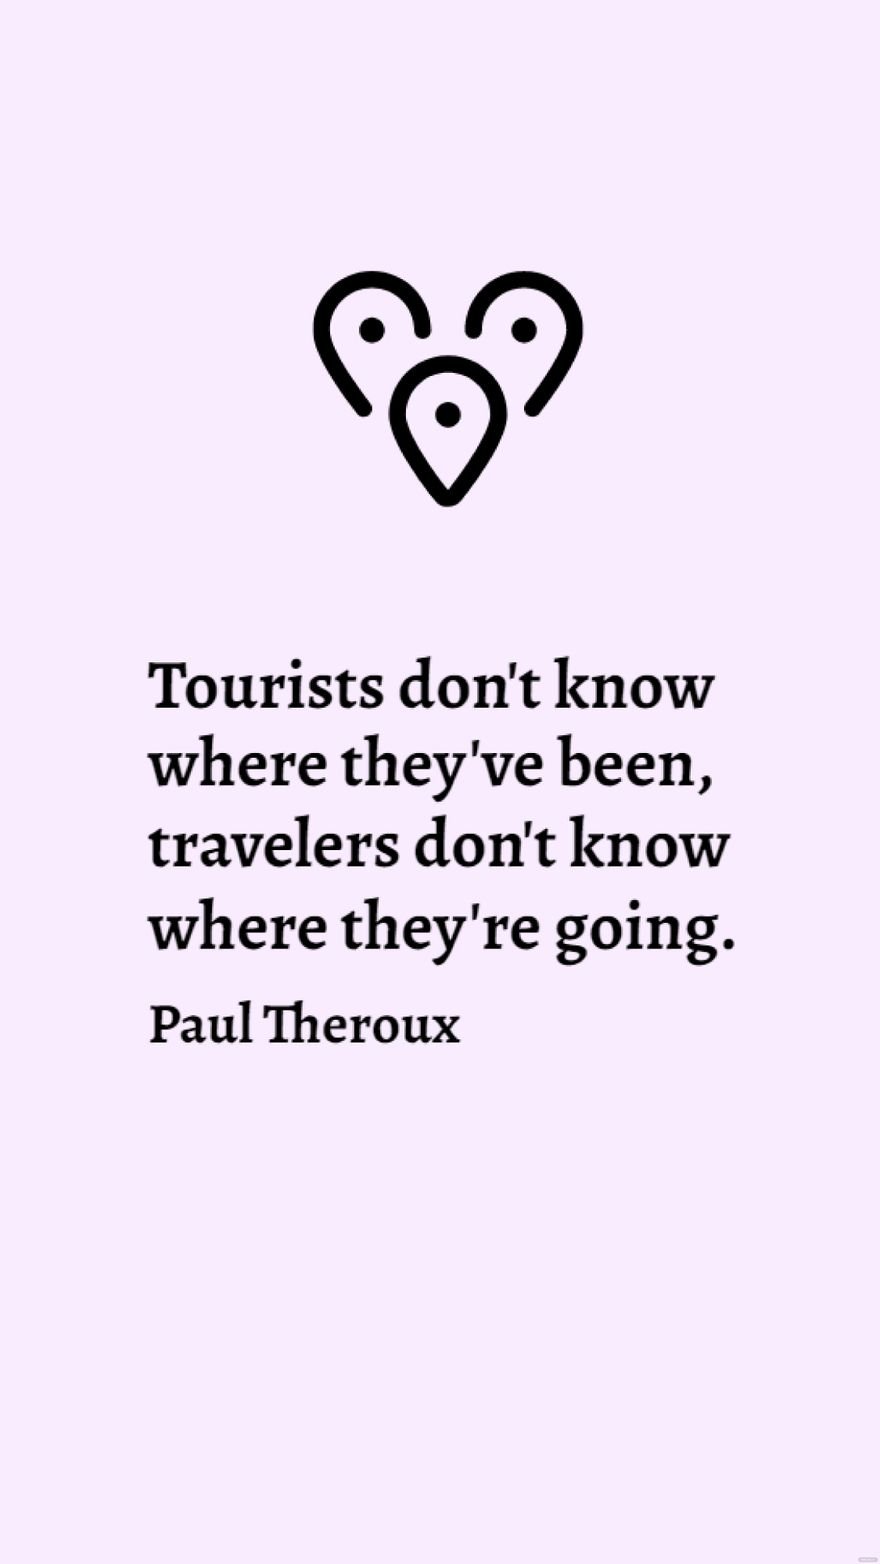 Paul Theroux - Tourists don't know where they've been, travelers don't know where they're going.